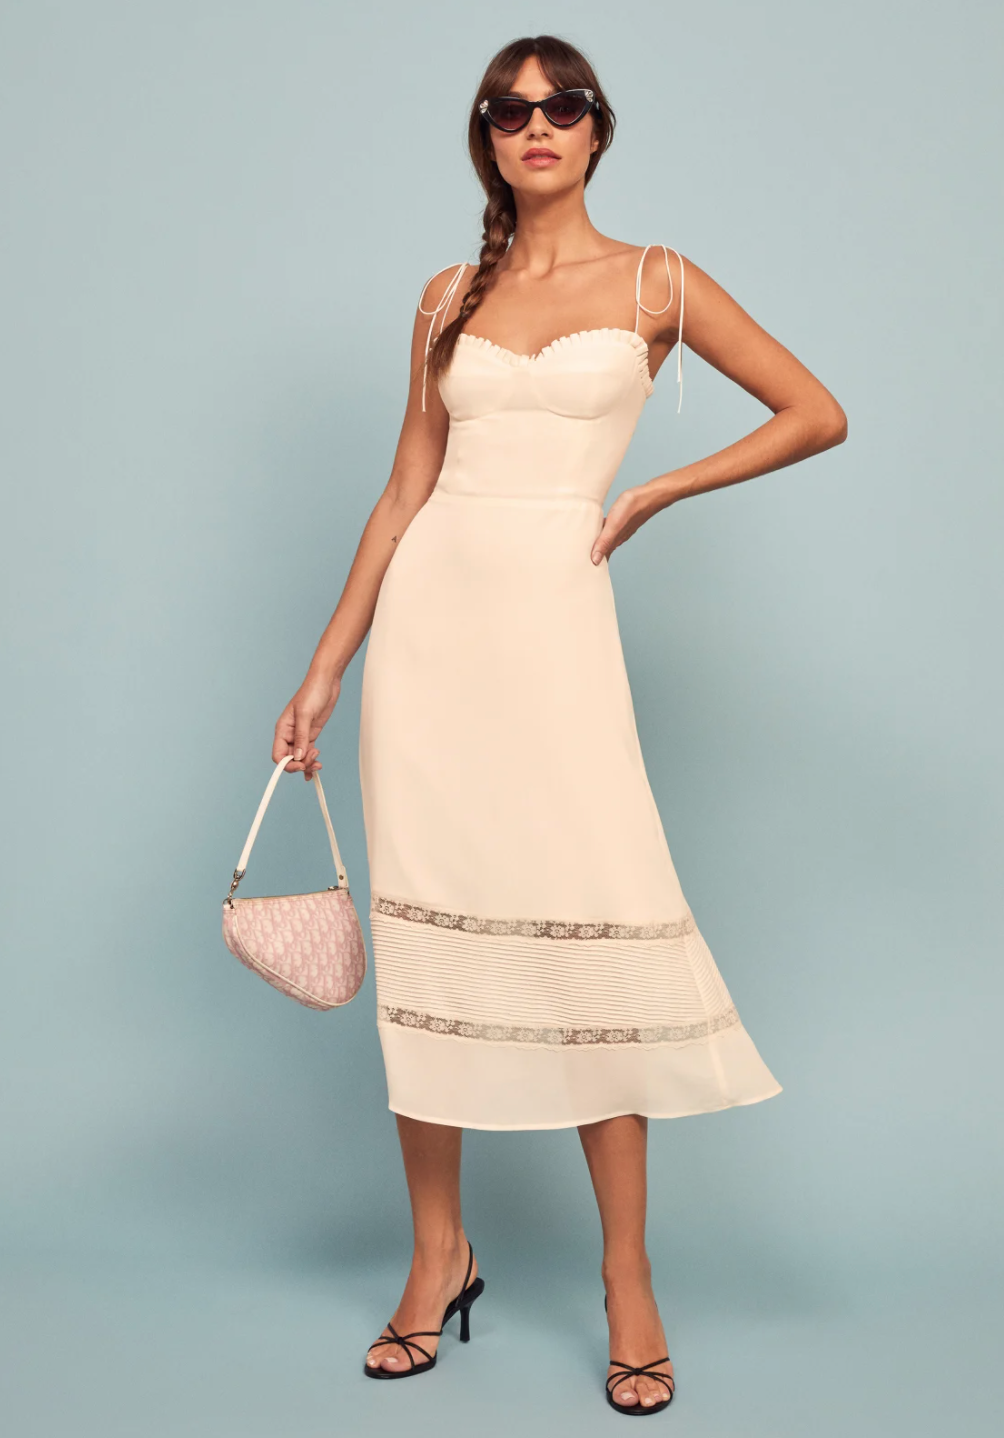 An ivory midi dress with tie spaghetti straps and lace details for a bride for her bridal shower. Dress is the Ronan Dress from Reformation